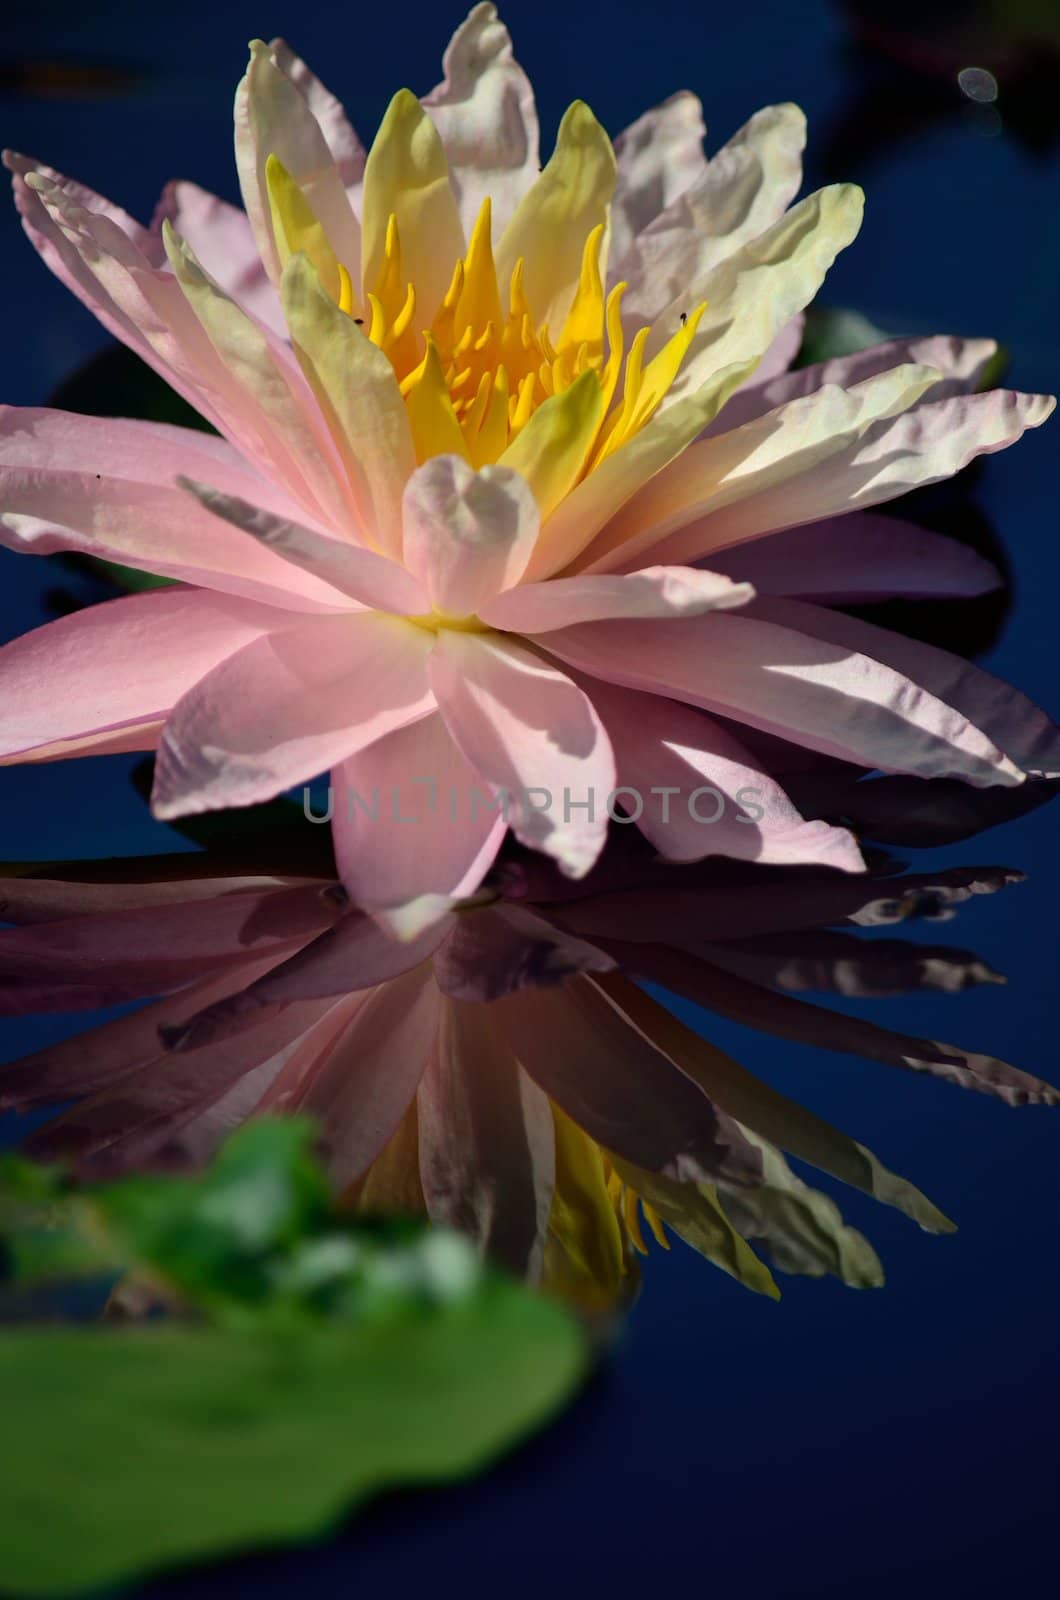 A soft pink and yellow water lily in bloom and reflecting in a pond